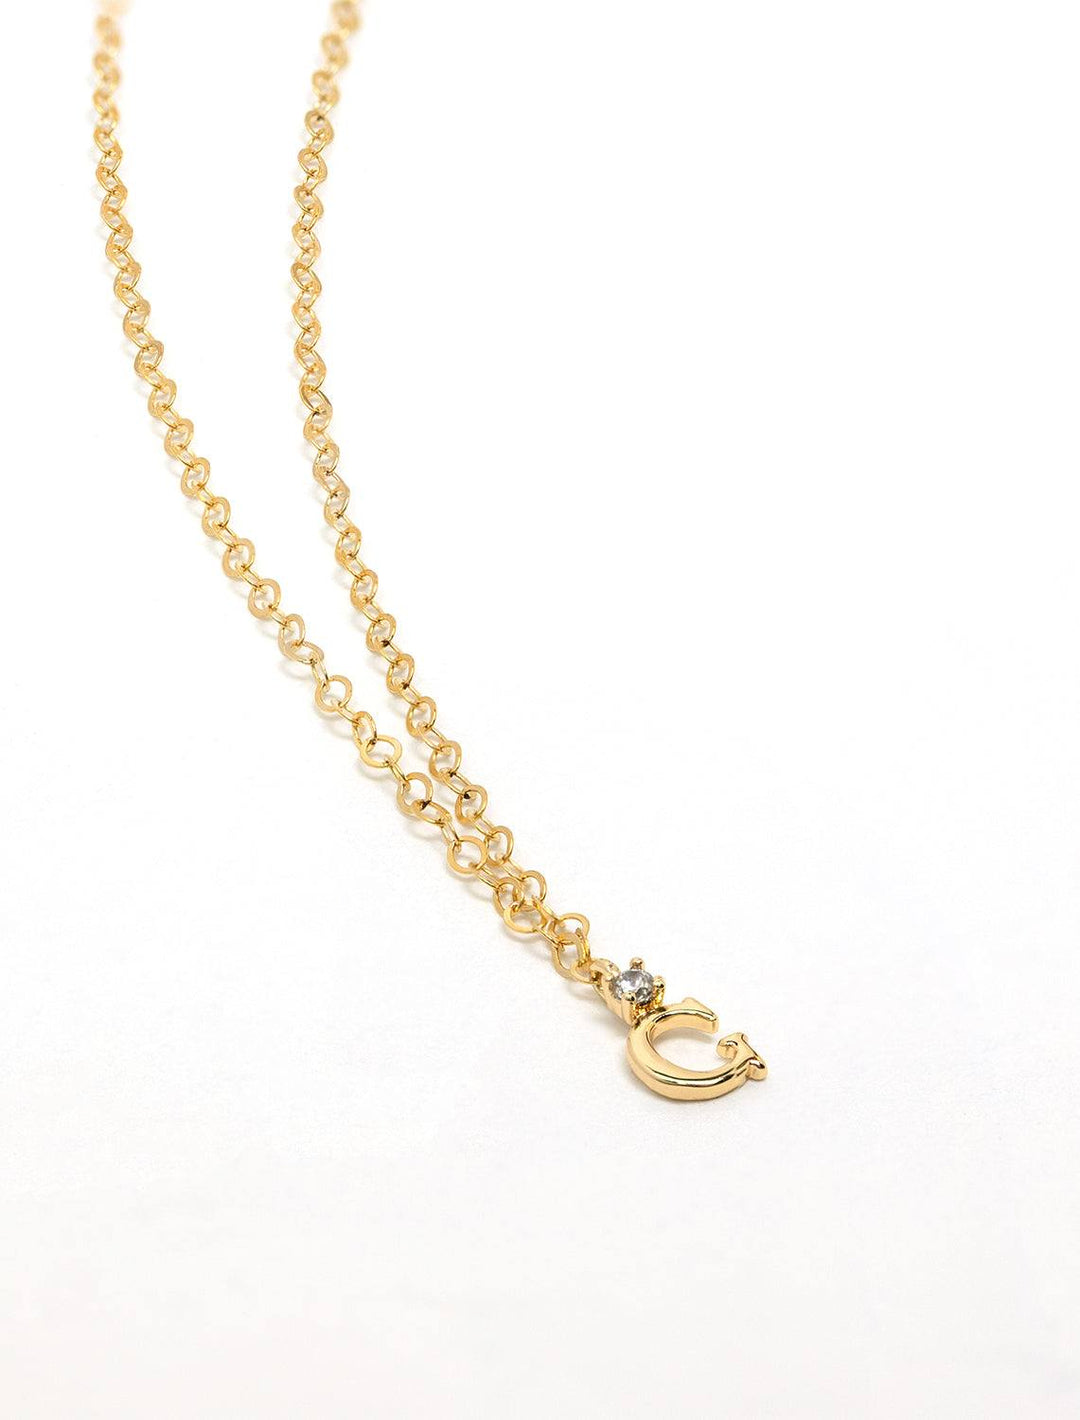 Marit Rae initial and cz necklace in gold | G - Twigs